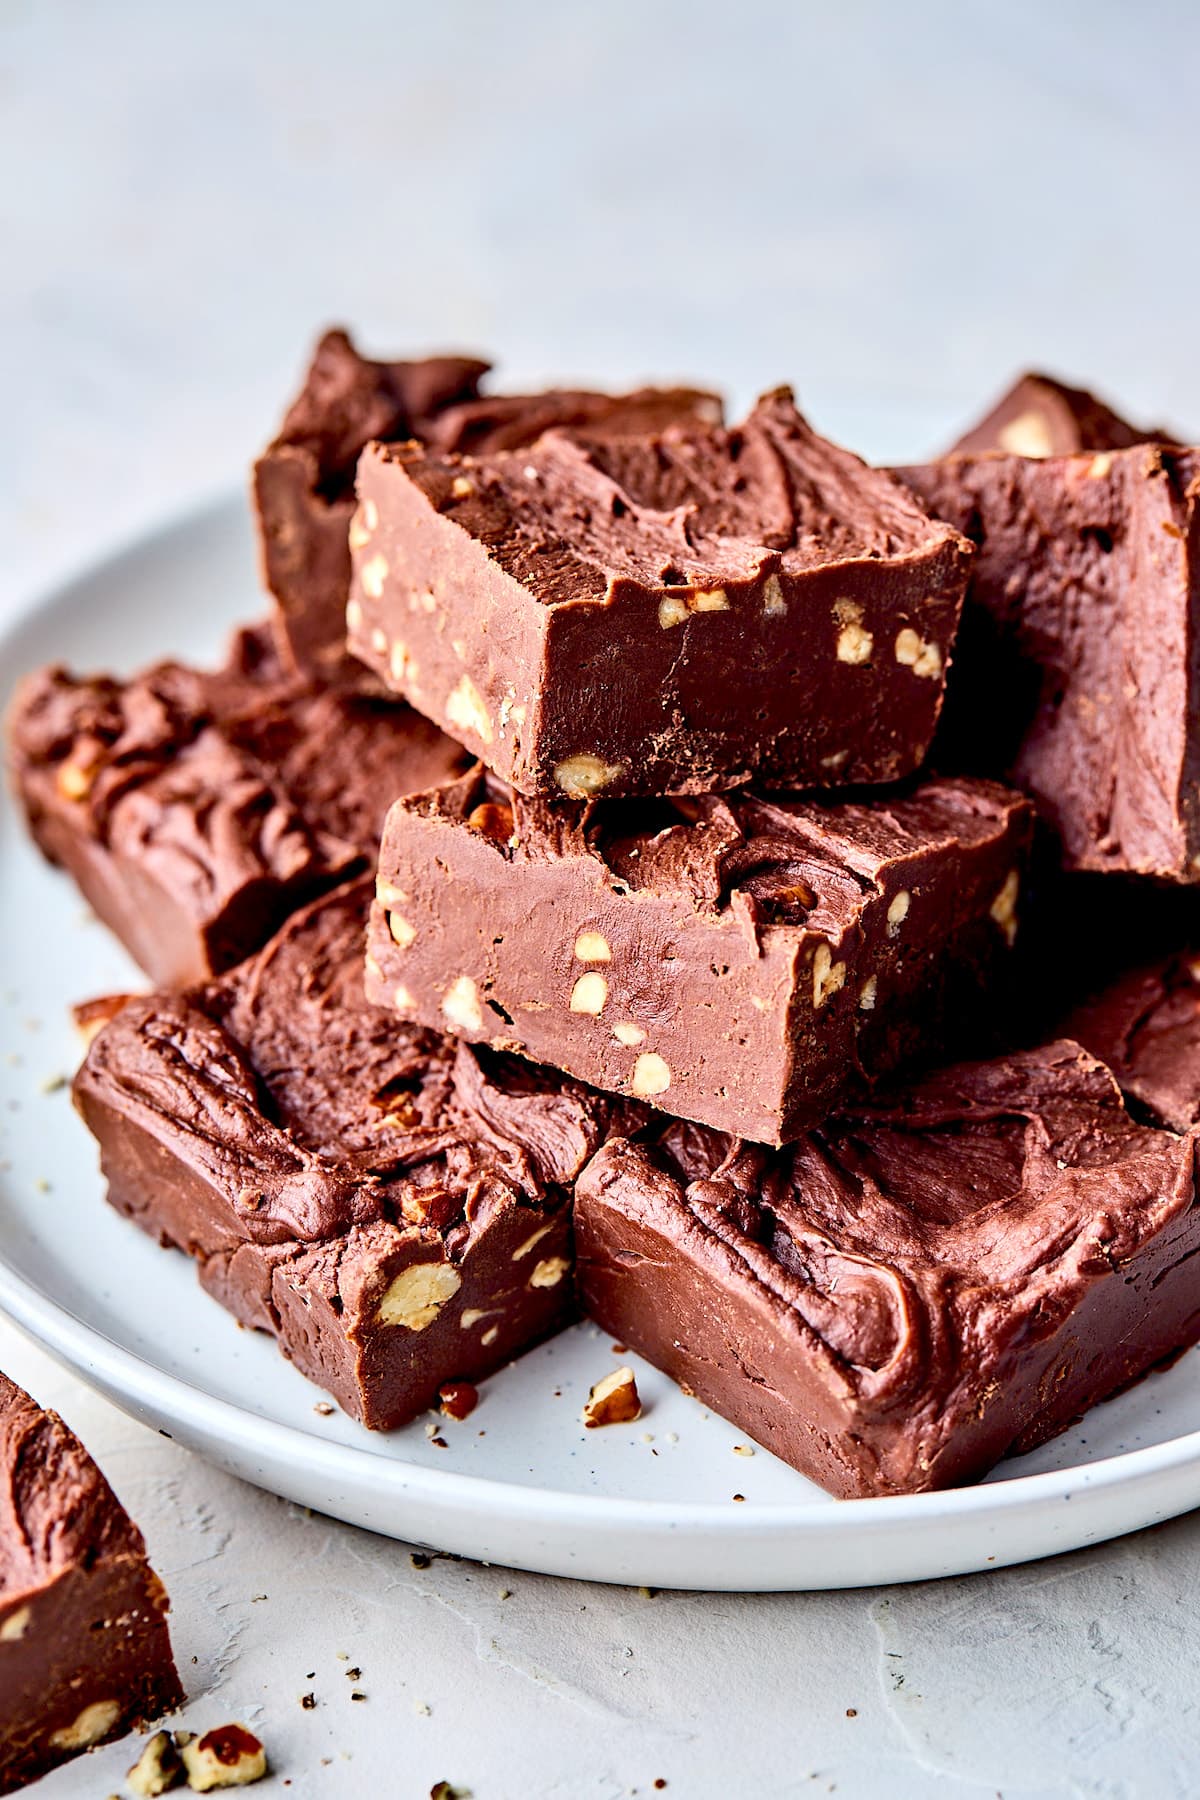 How to Make Fudge That Is as Decadent as the Store-Bought Kind